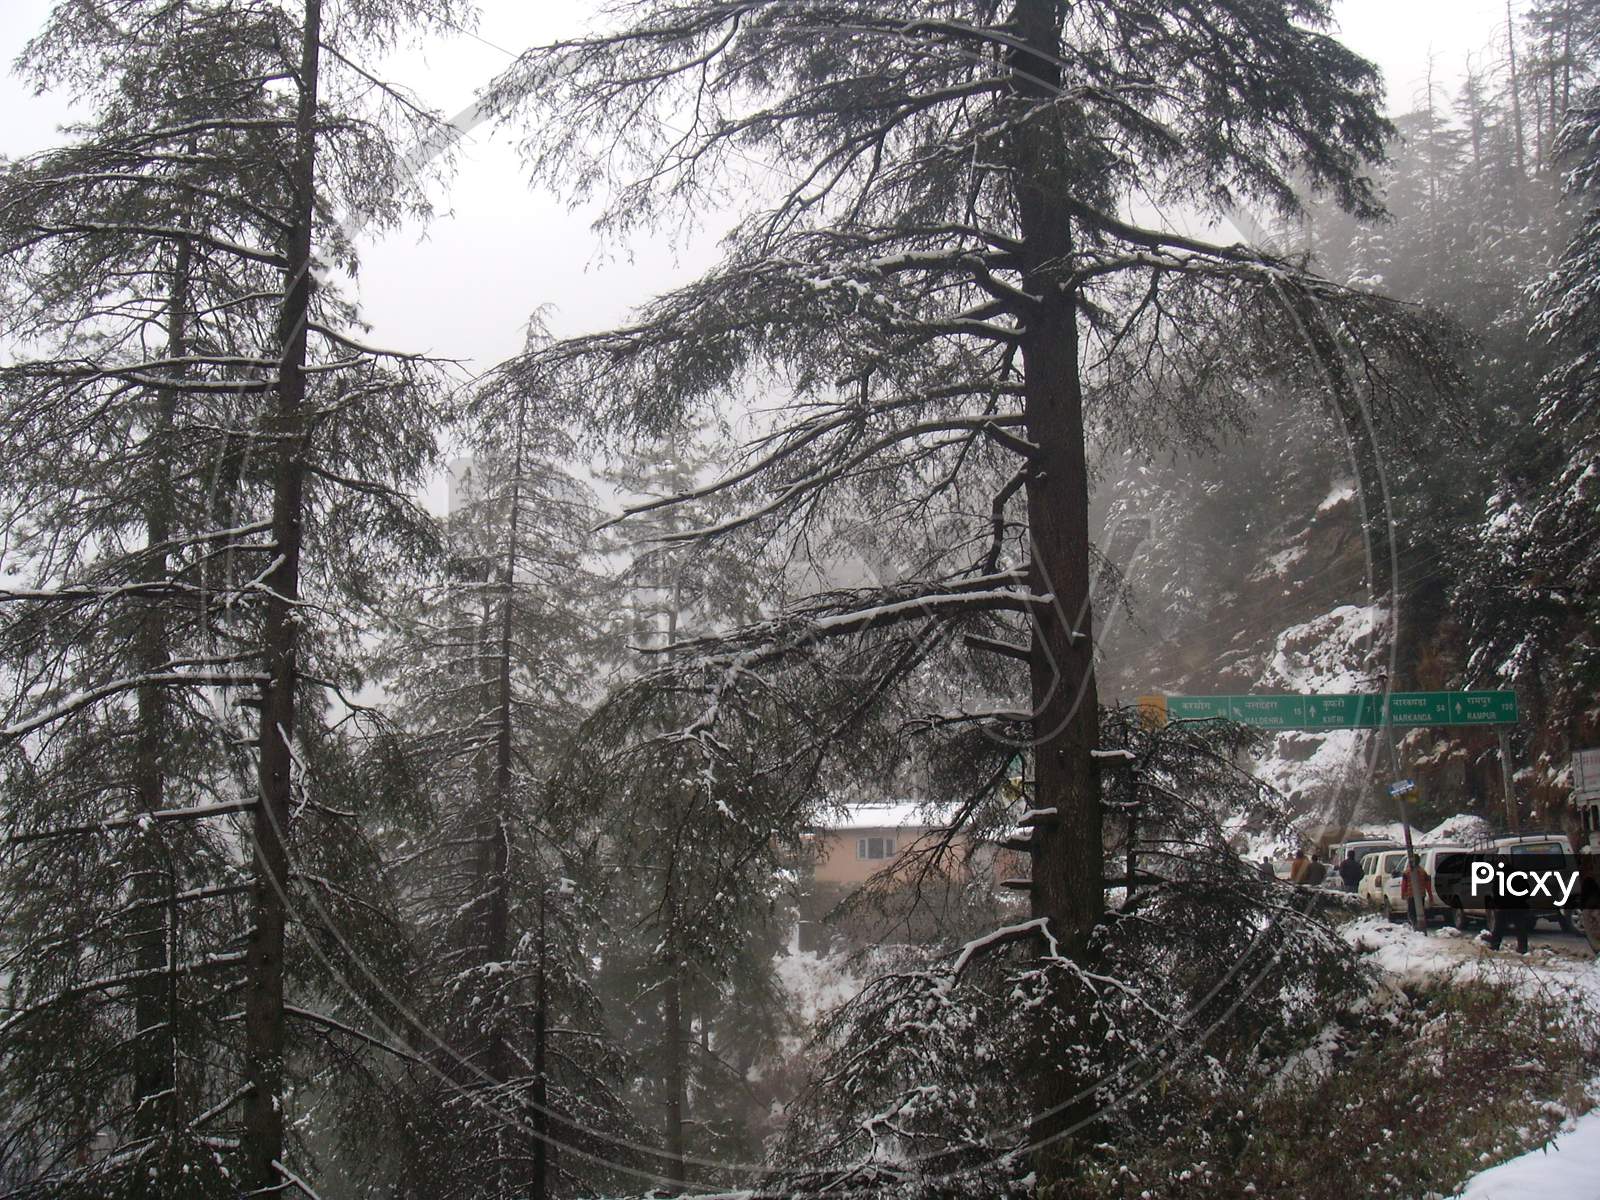 Shimla, on a winter frosty day, after the snowfall